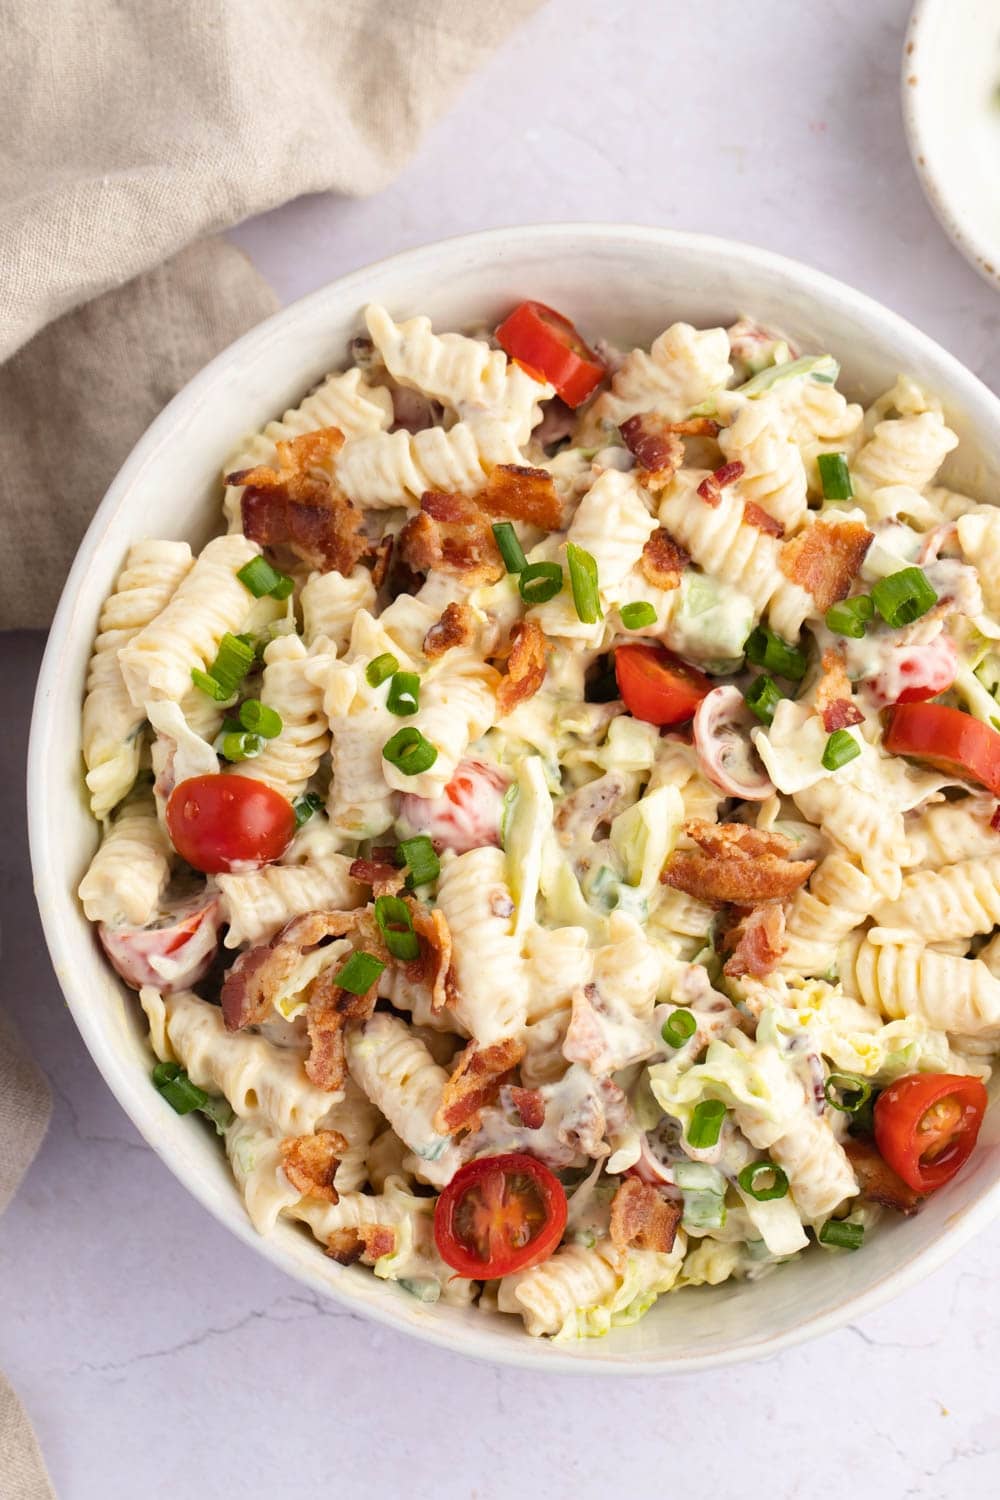 BLT Pasta Salad on a Bowl Made with Crispy Bacon, Tomatoes, Lettuce, Dressing and Scallions